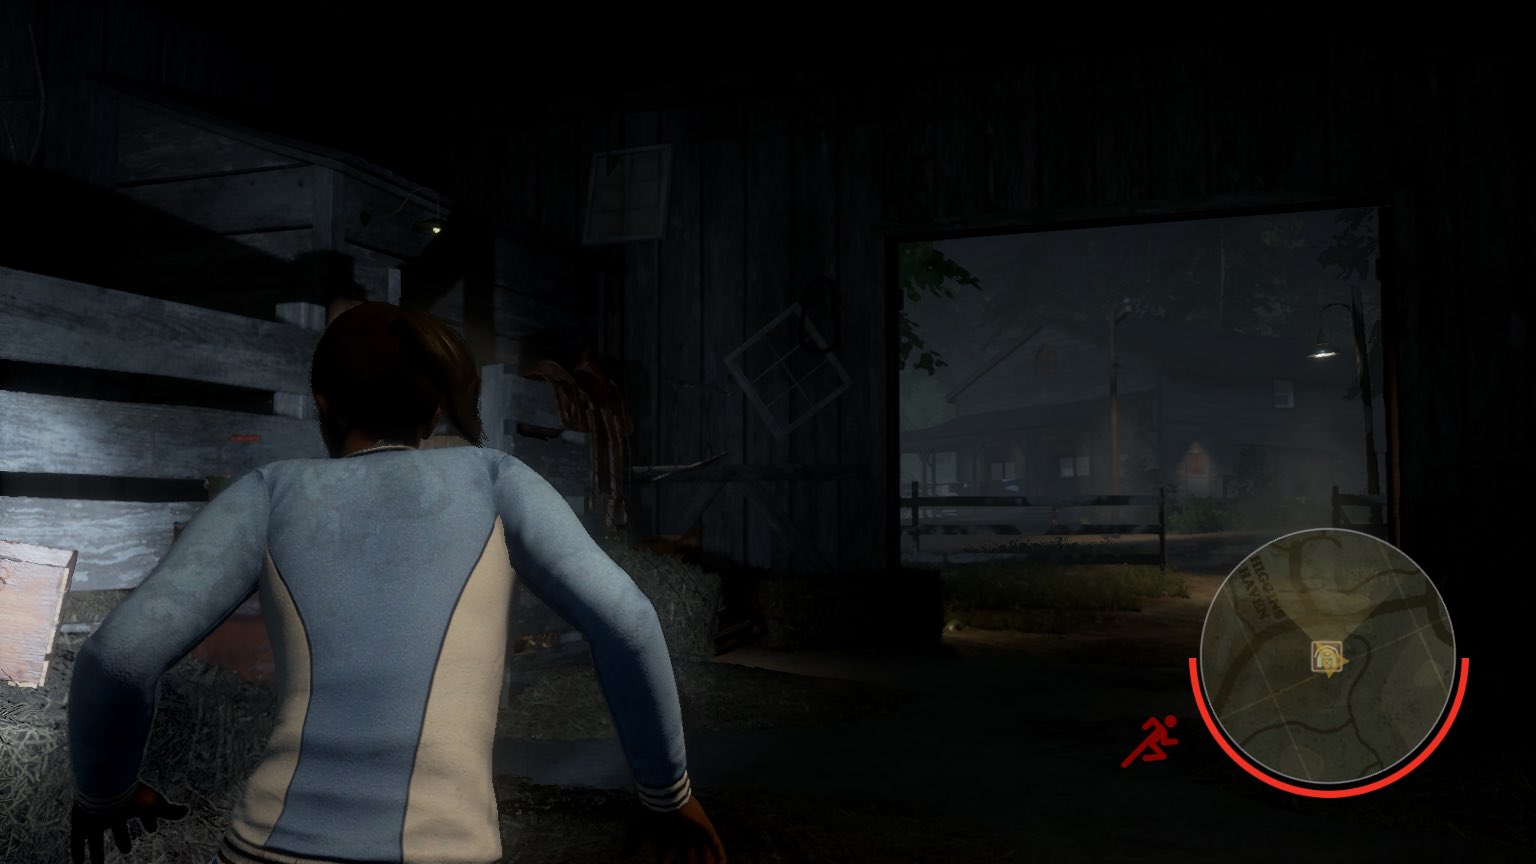 Friday the 13th: The Game screenshot 8517